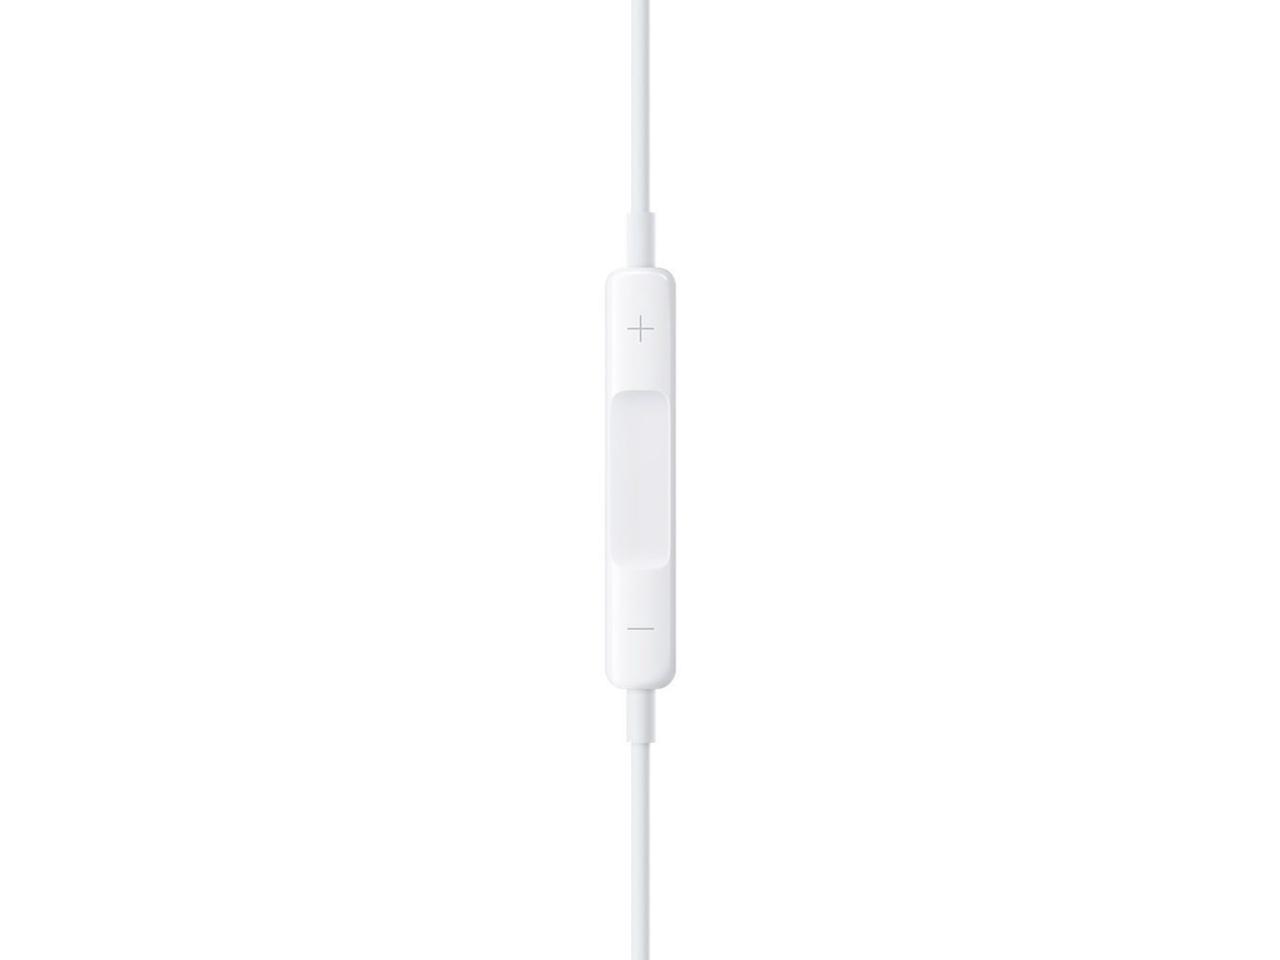 Apple White 3 5mm Oem Earpods With Remote And Mic Md7ll A Newegg Com